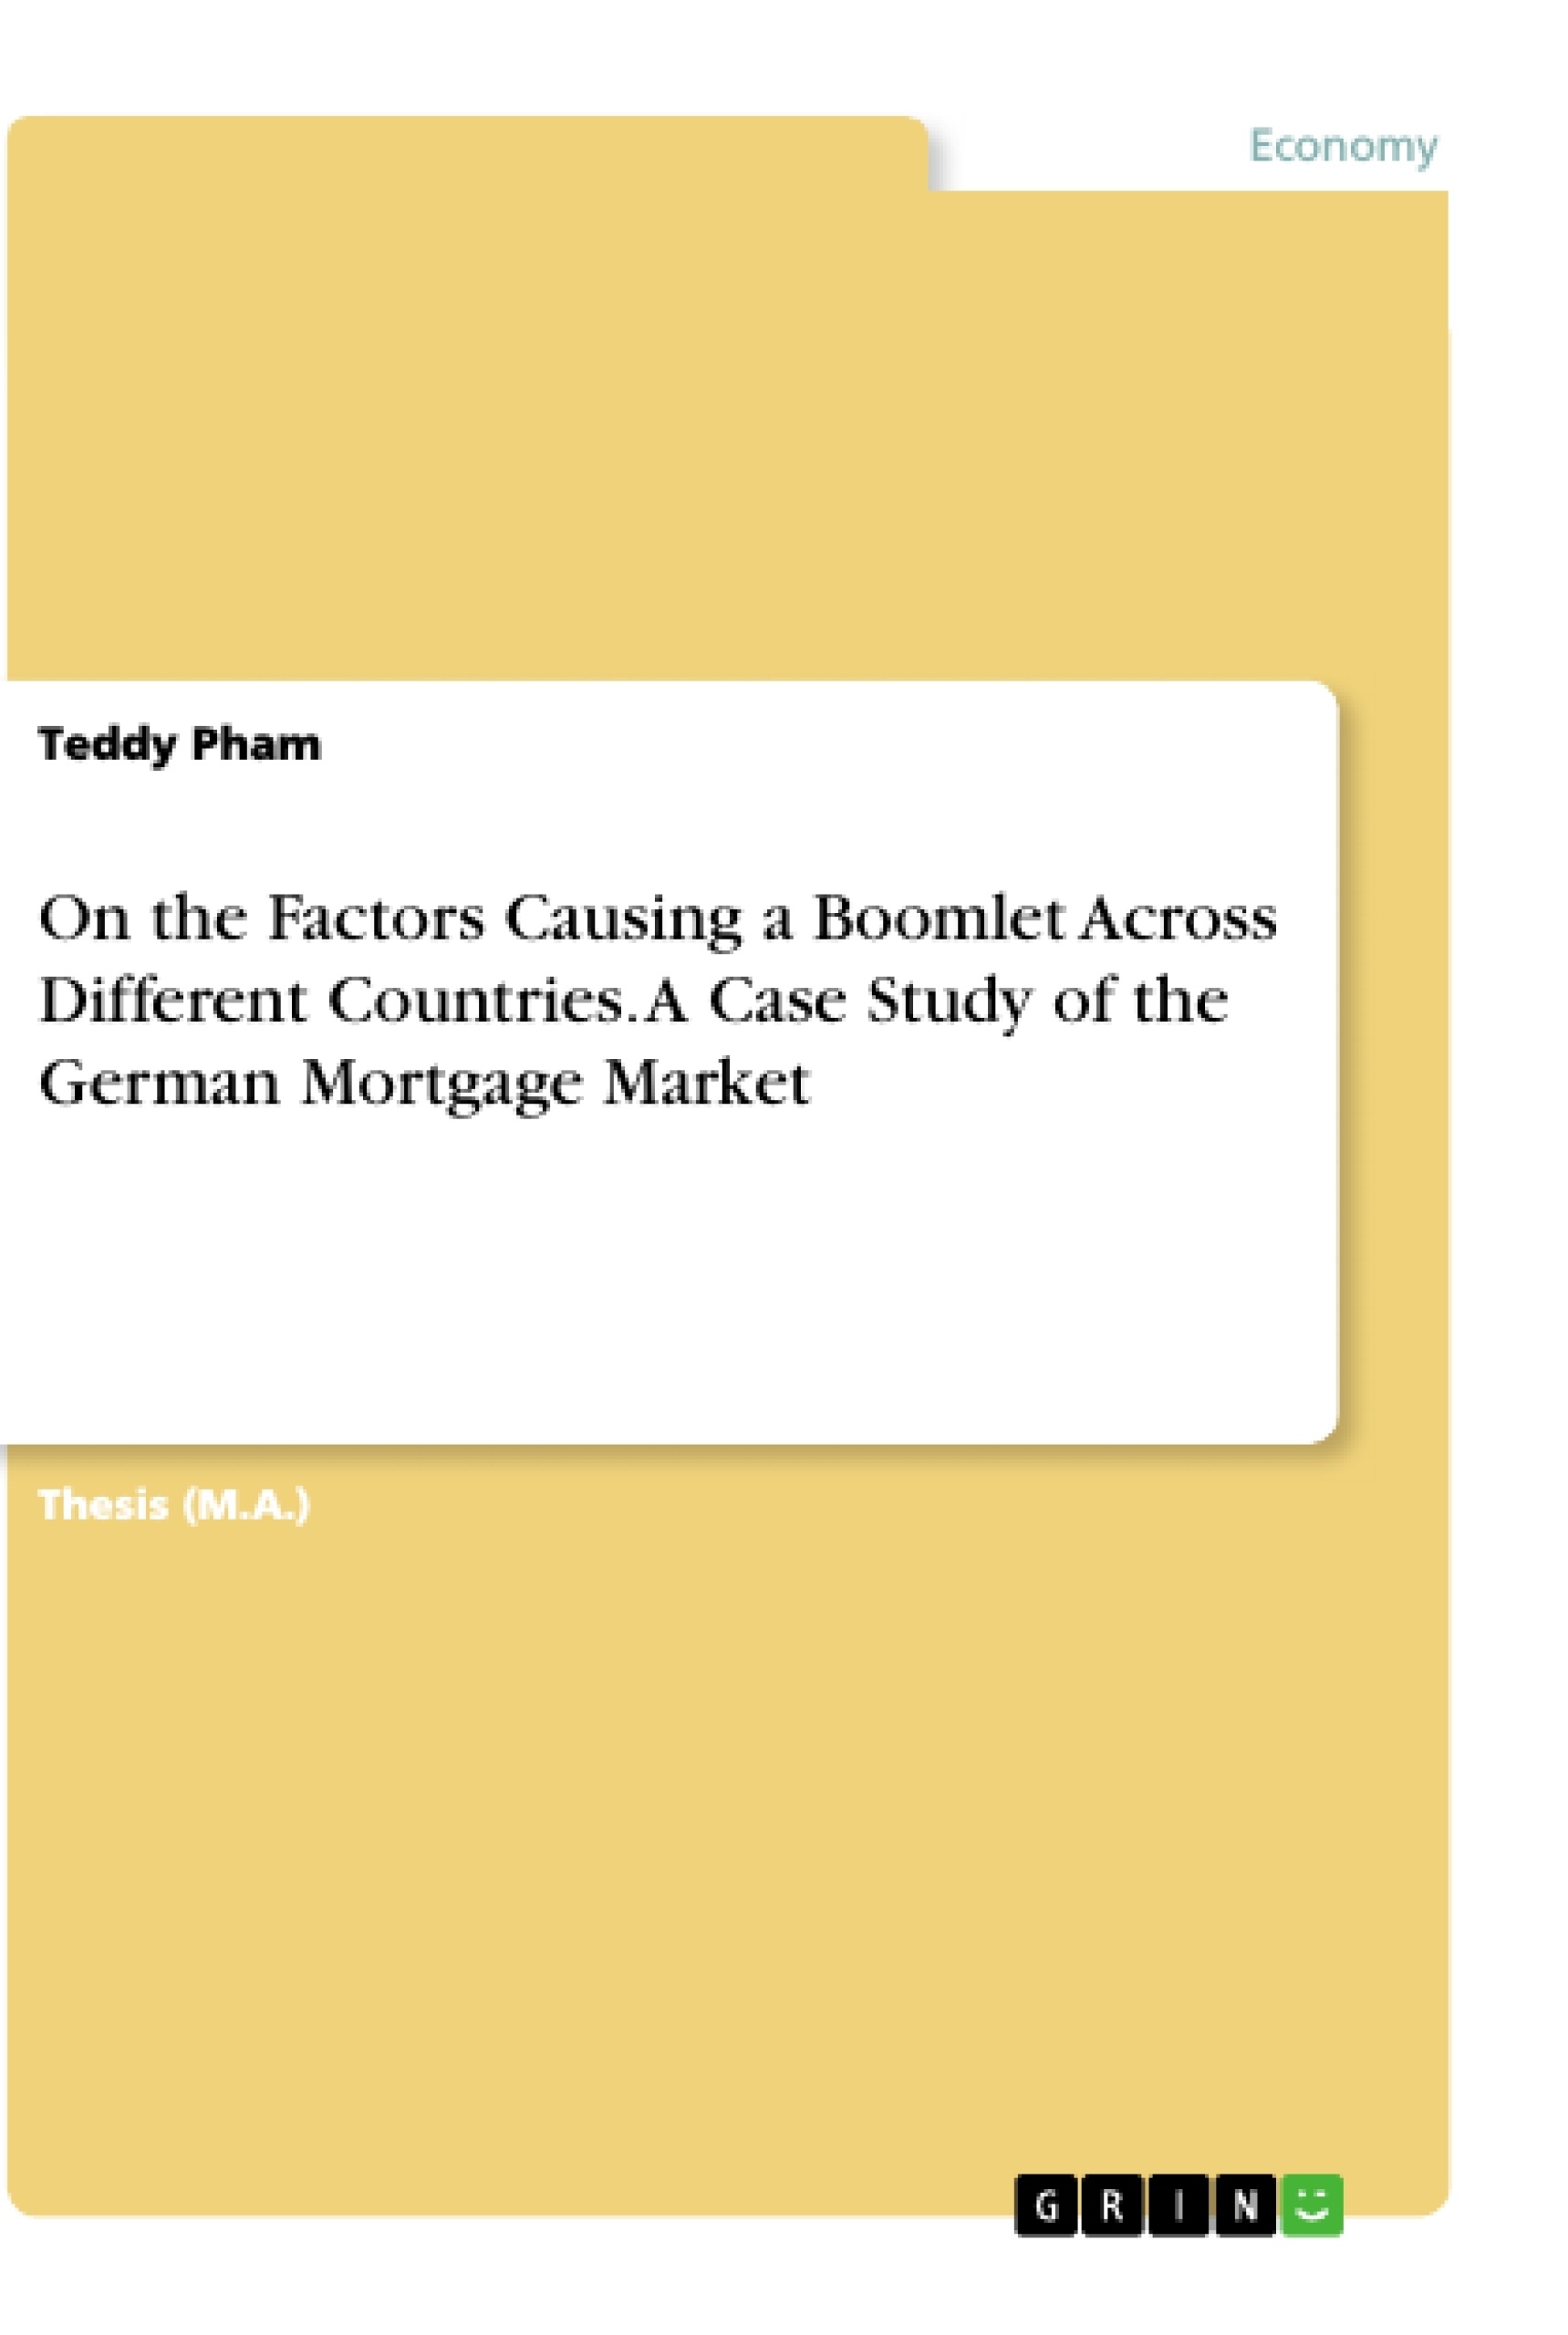 Title: On the Factors Causing a Boomlet Across Different Countries. A Case Study of the German Mortgage Market